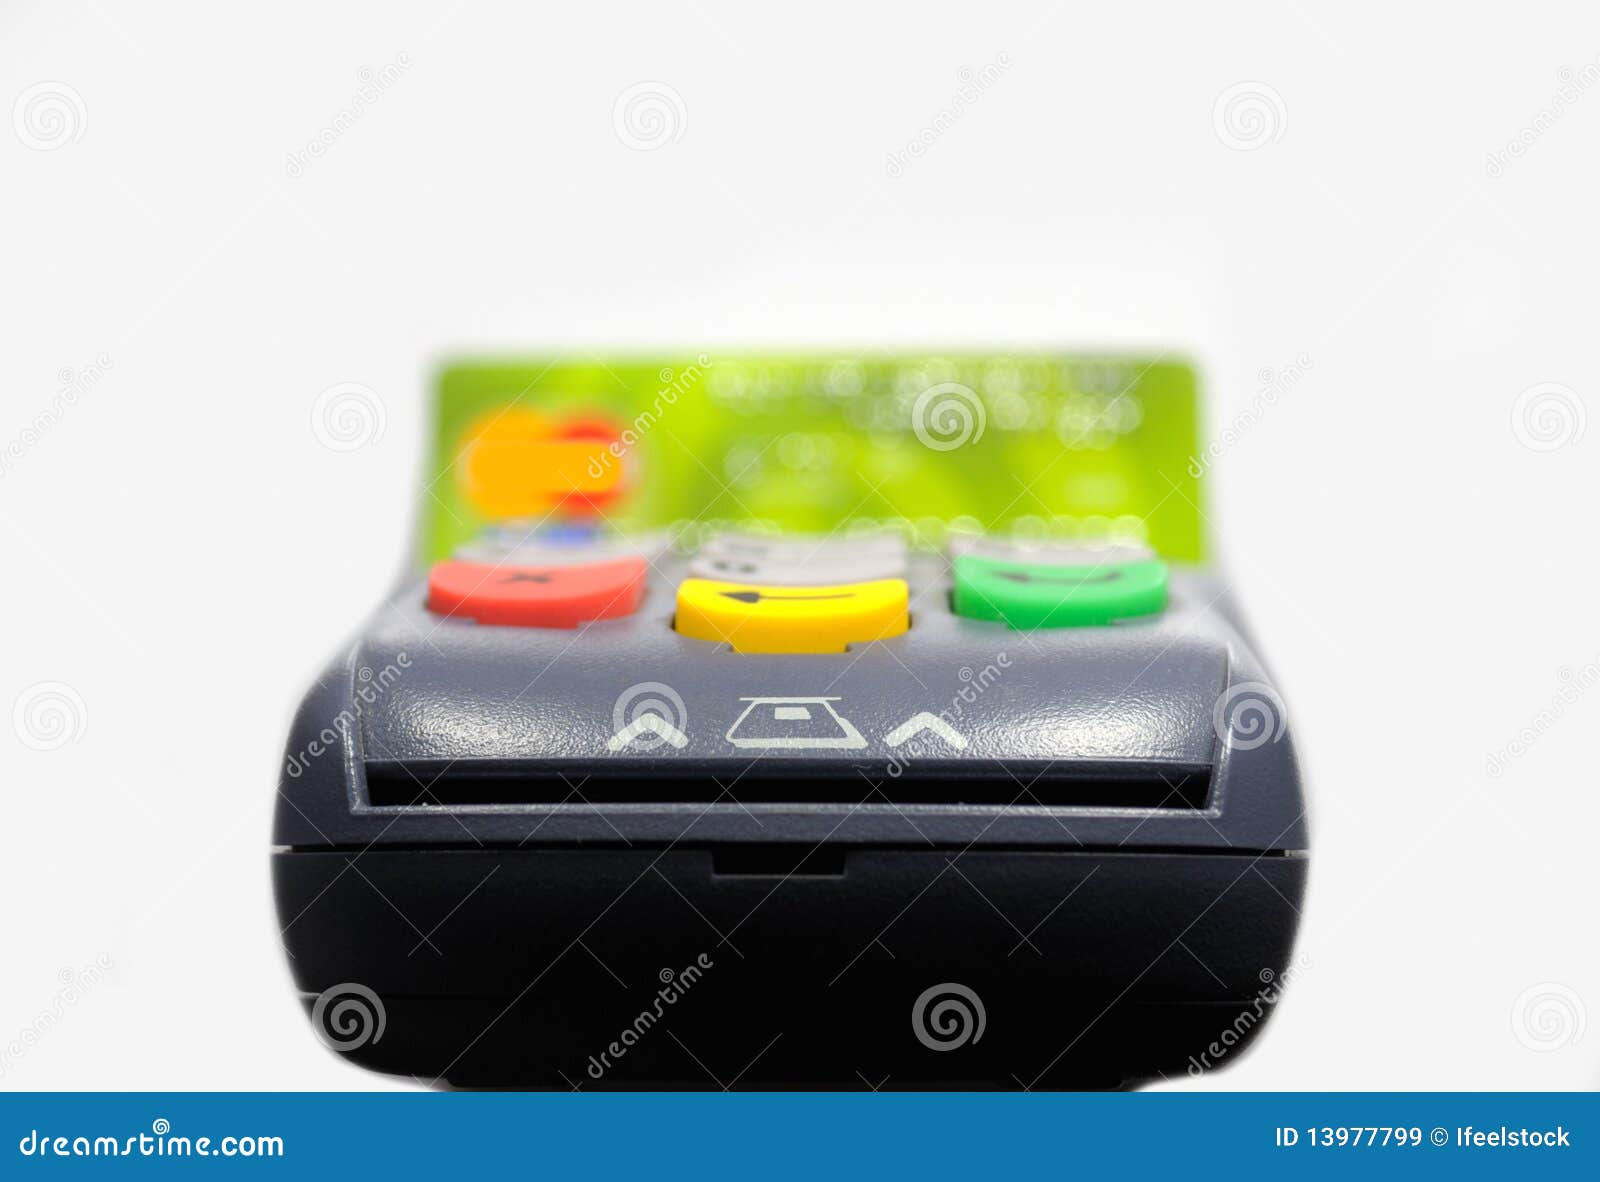 POS Terminal And Credit Card Processing Stock Image - Image of commerce, check: 13977799